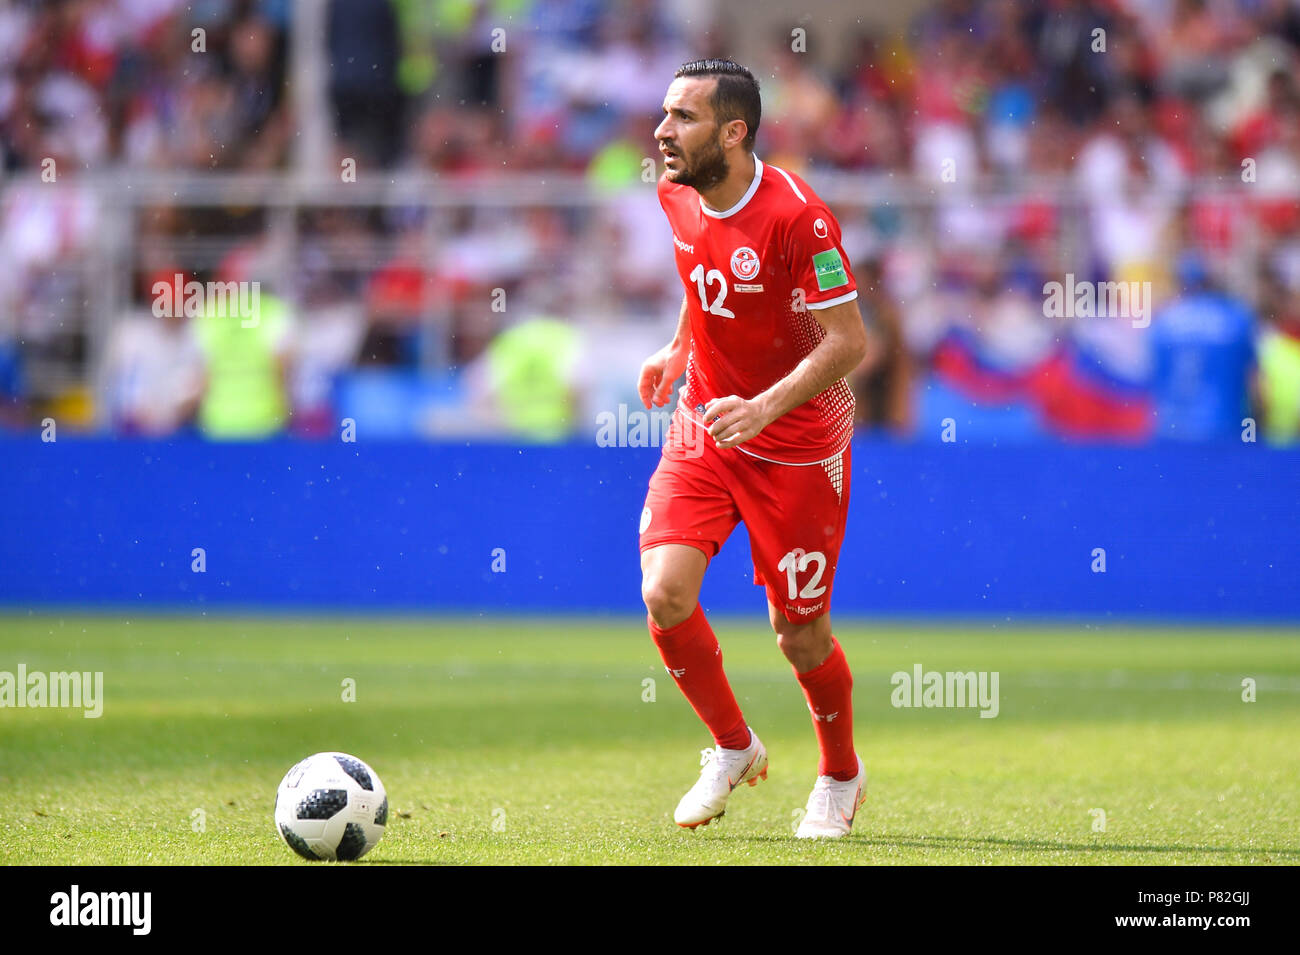 MOSCOW, RUSSIA - JUNE 23: Ali Maaloul of Tunisia in action during the 2018 FIFA World Cup Russia group G match between Belgium and Tunisia at Spartak Stadium on June 23, 2018 in Moscow, Russia. (Photo by Lukasz Laskowski/PressFocus/MB Media) Stock Photo